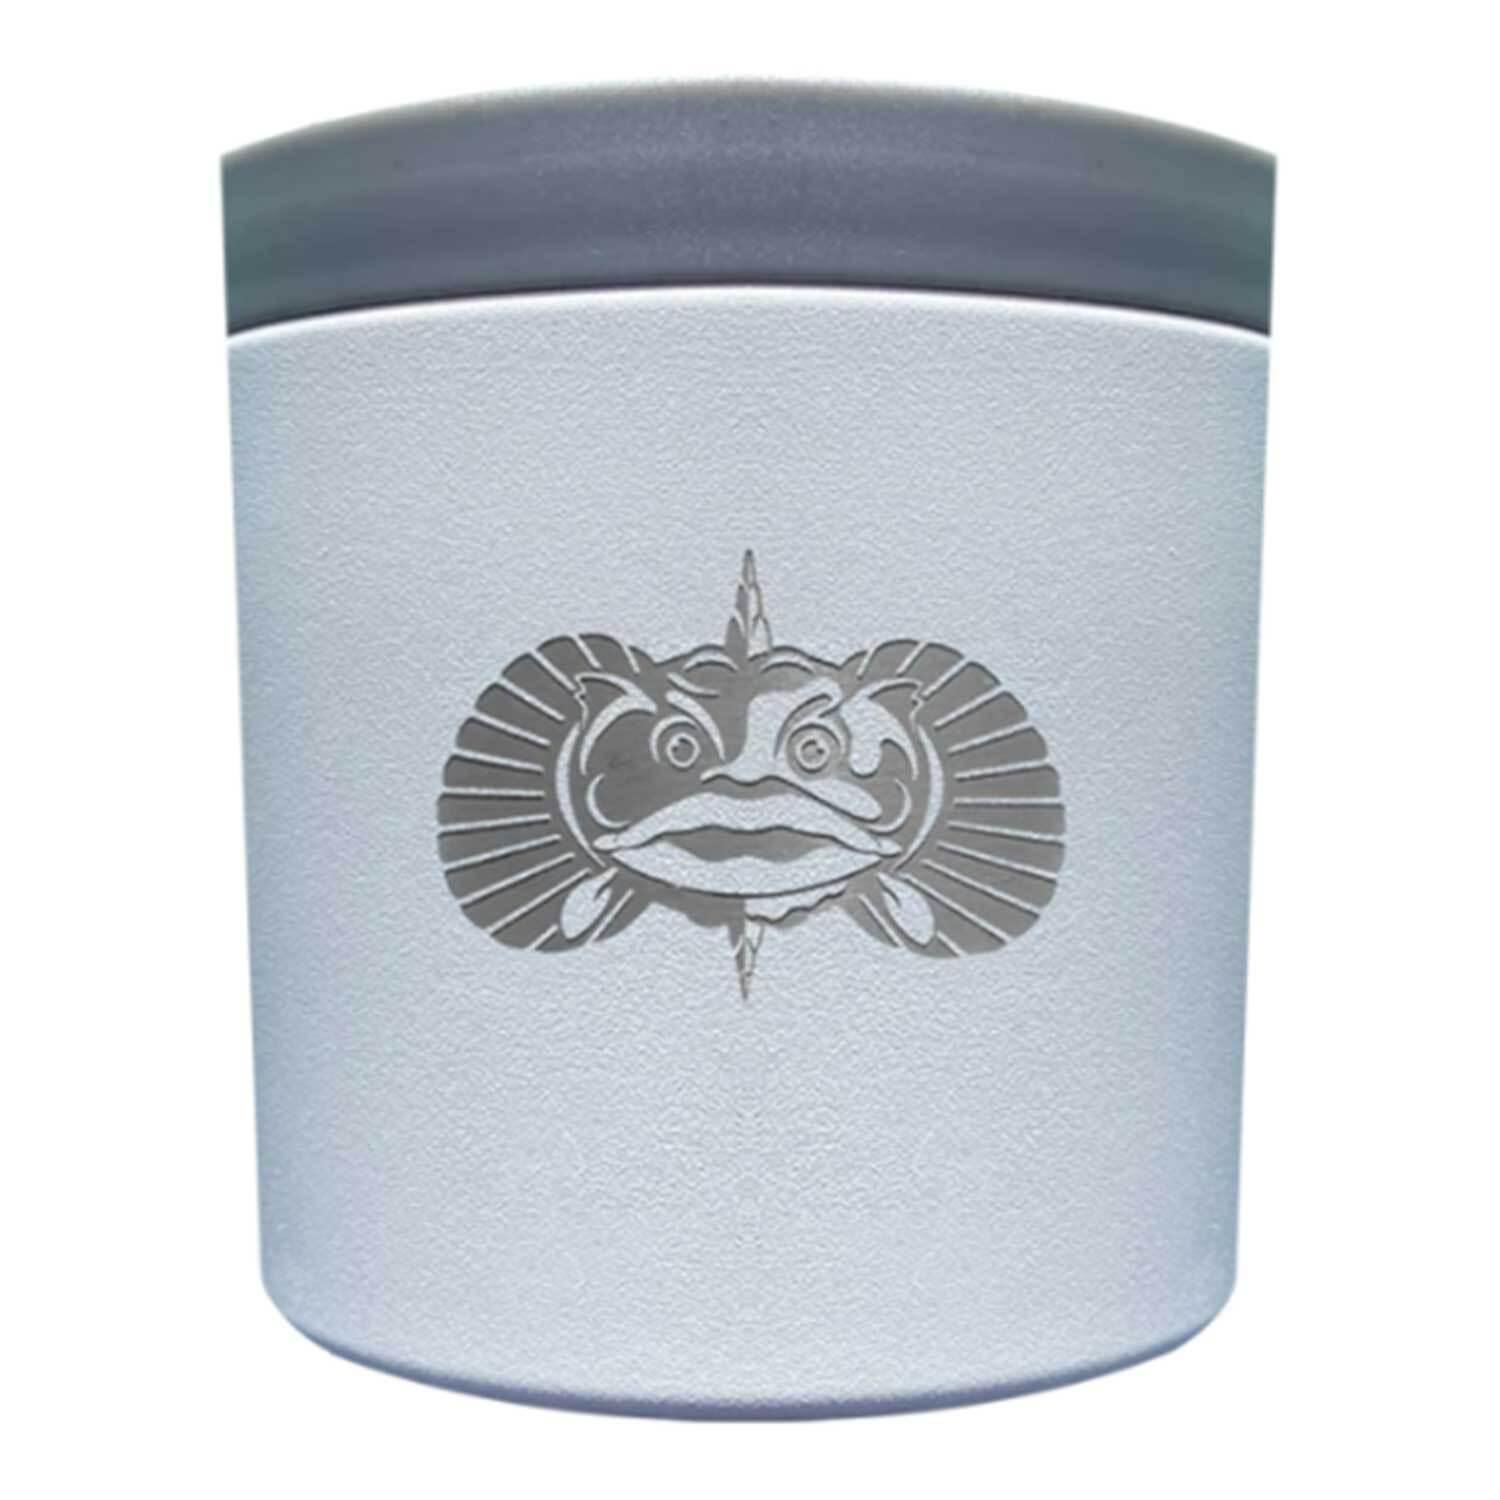 ToadFish The Anchor Non-Tipping Cup Holder Graphite Gray for Coffee Cups  tumbler